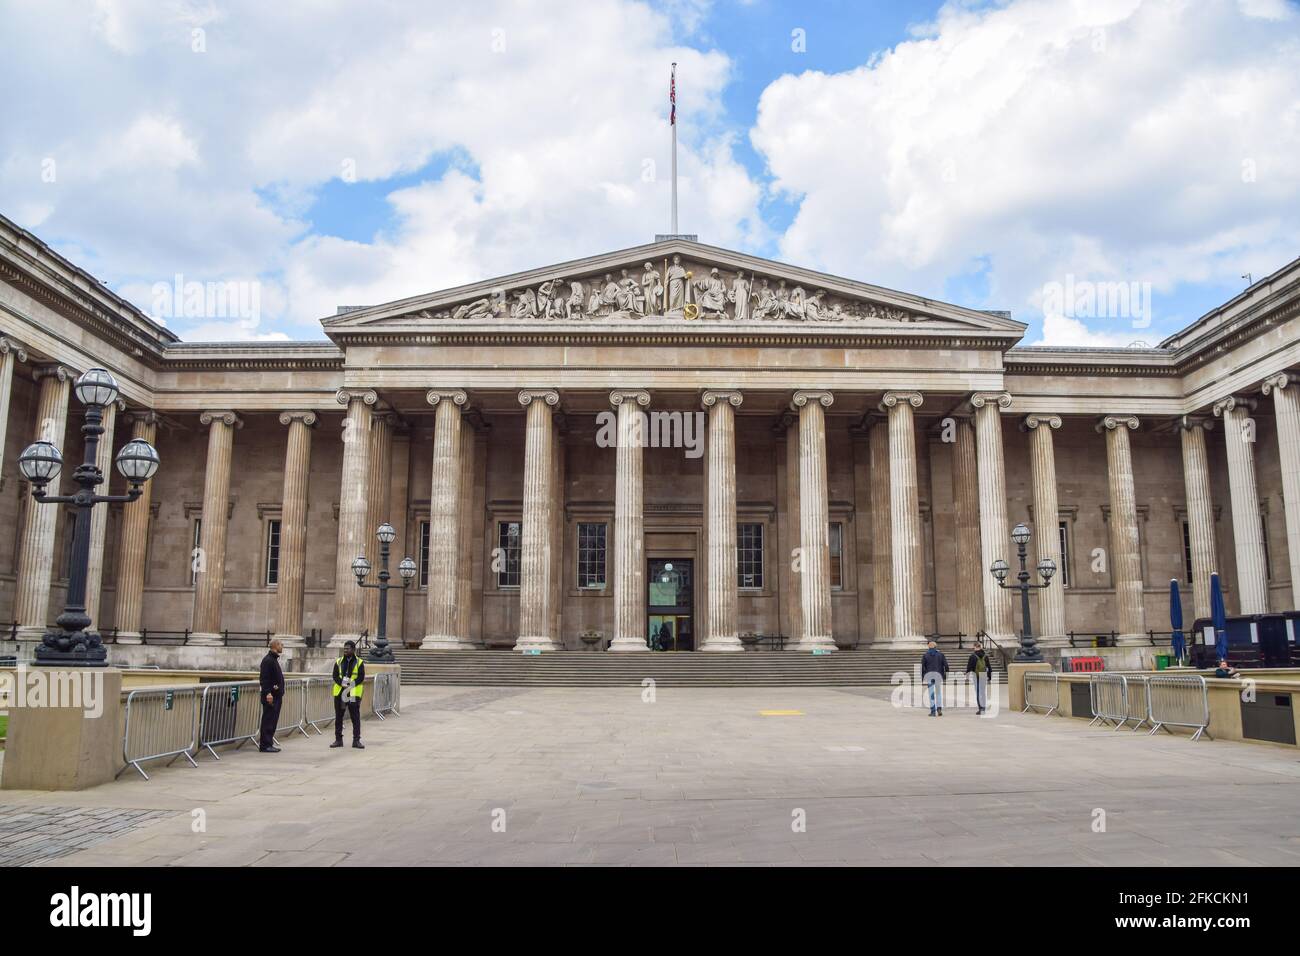 London, United Kingdom. 30th April 2021. Exterior view of the British Museum in Central London, which has been closed for much of the time since the coronavirus pandemic began. Museums are set to reopen on the 17th May. Stock Photo